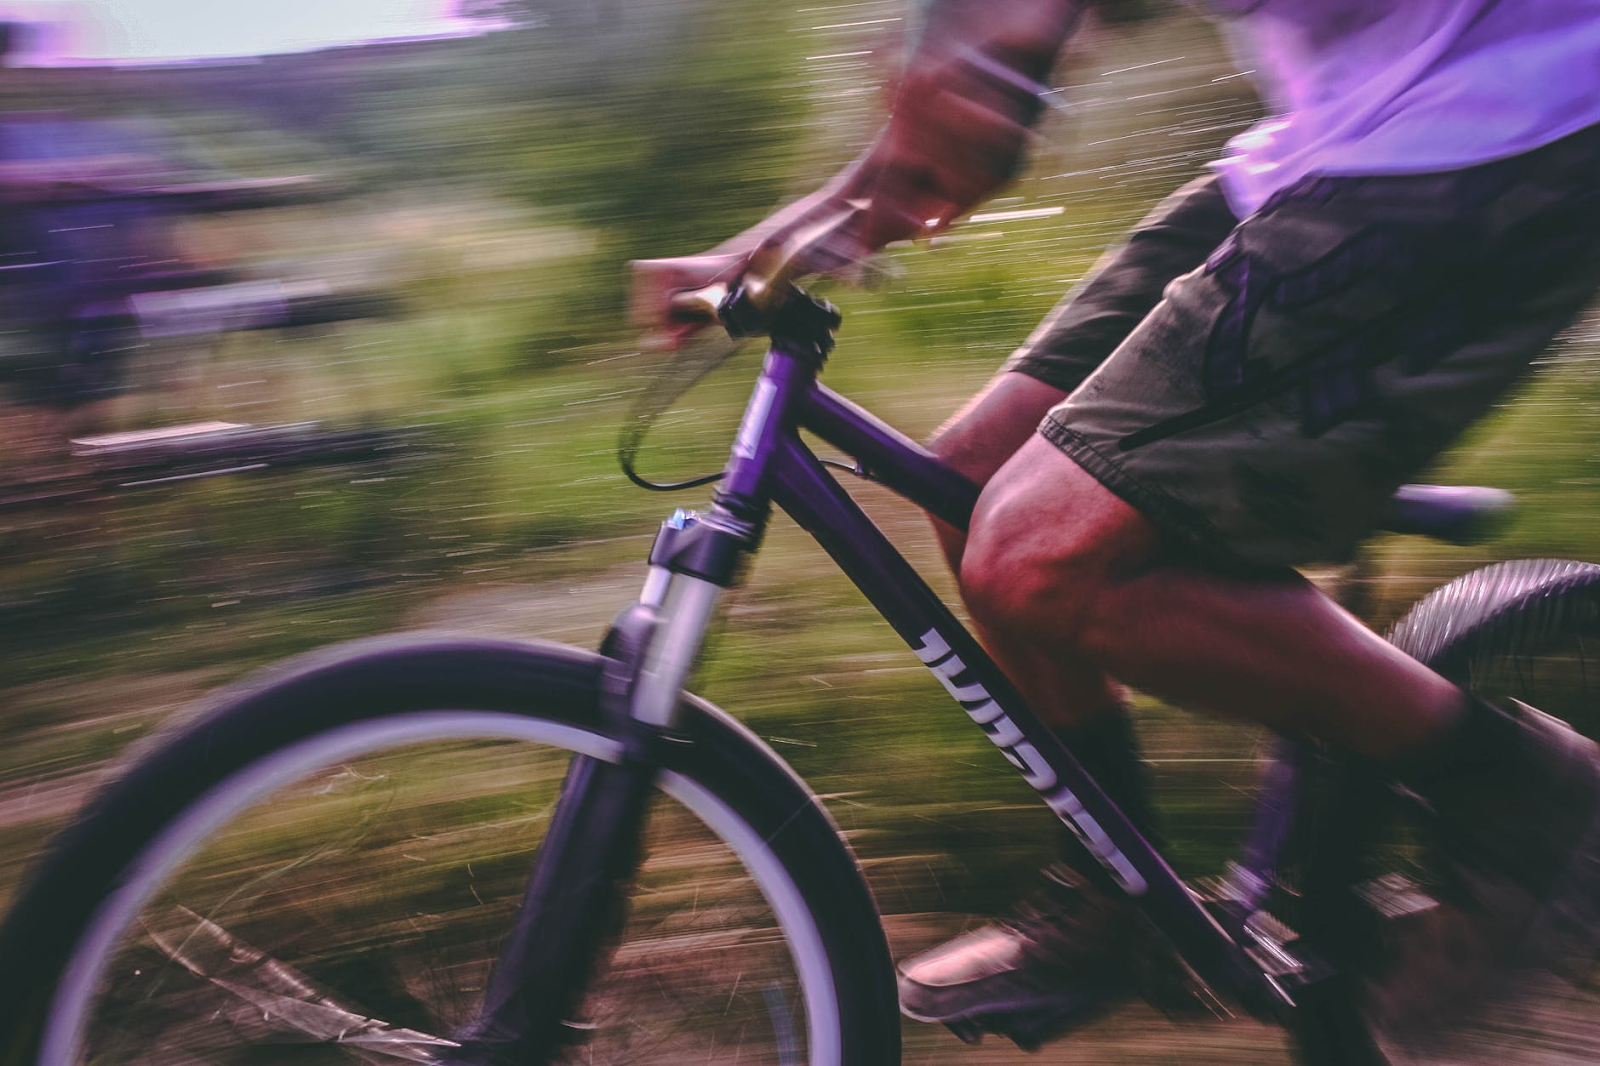 What are the Most Popular Extreme Sports? Mountain biking